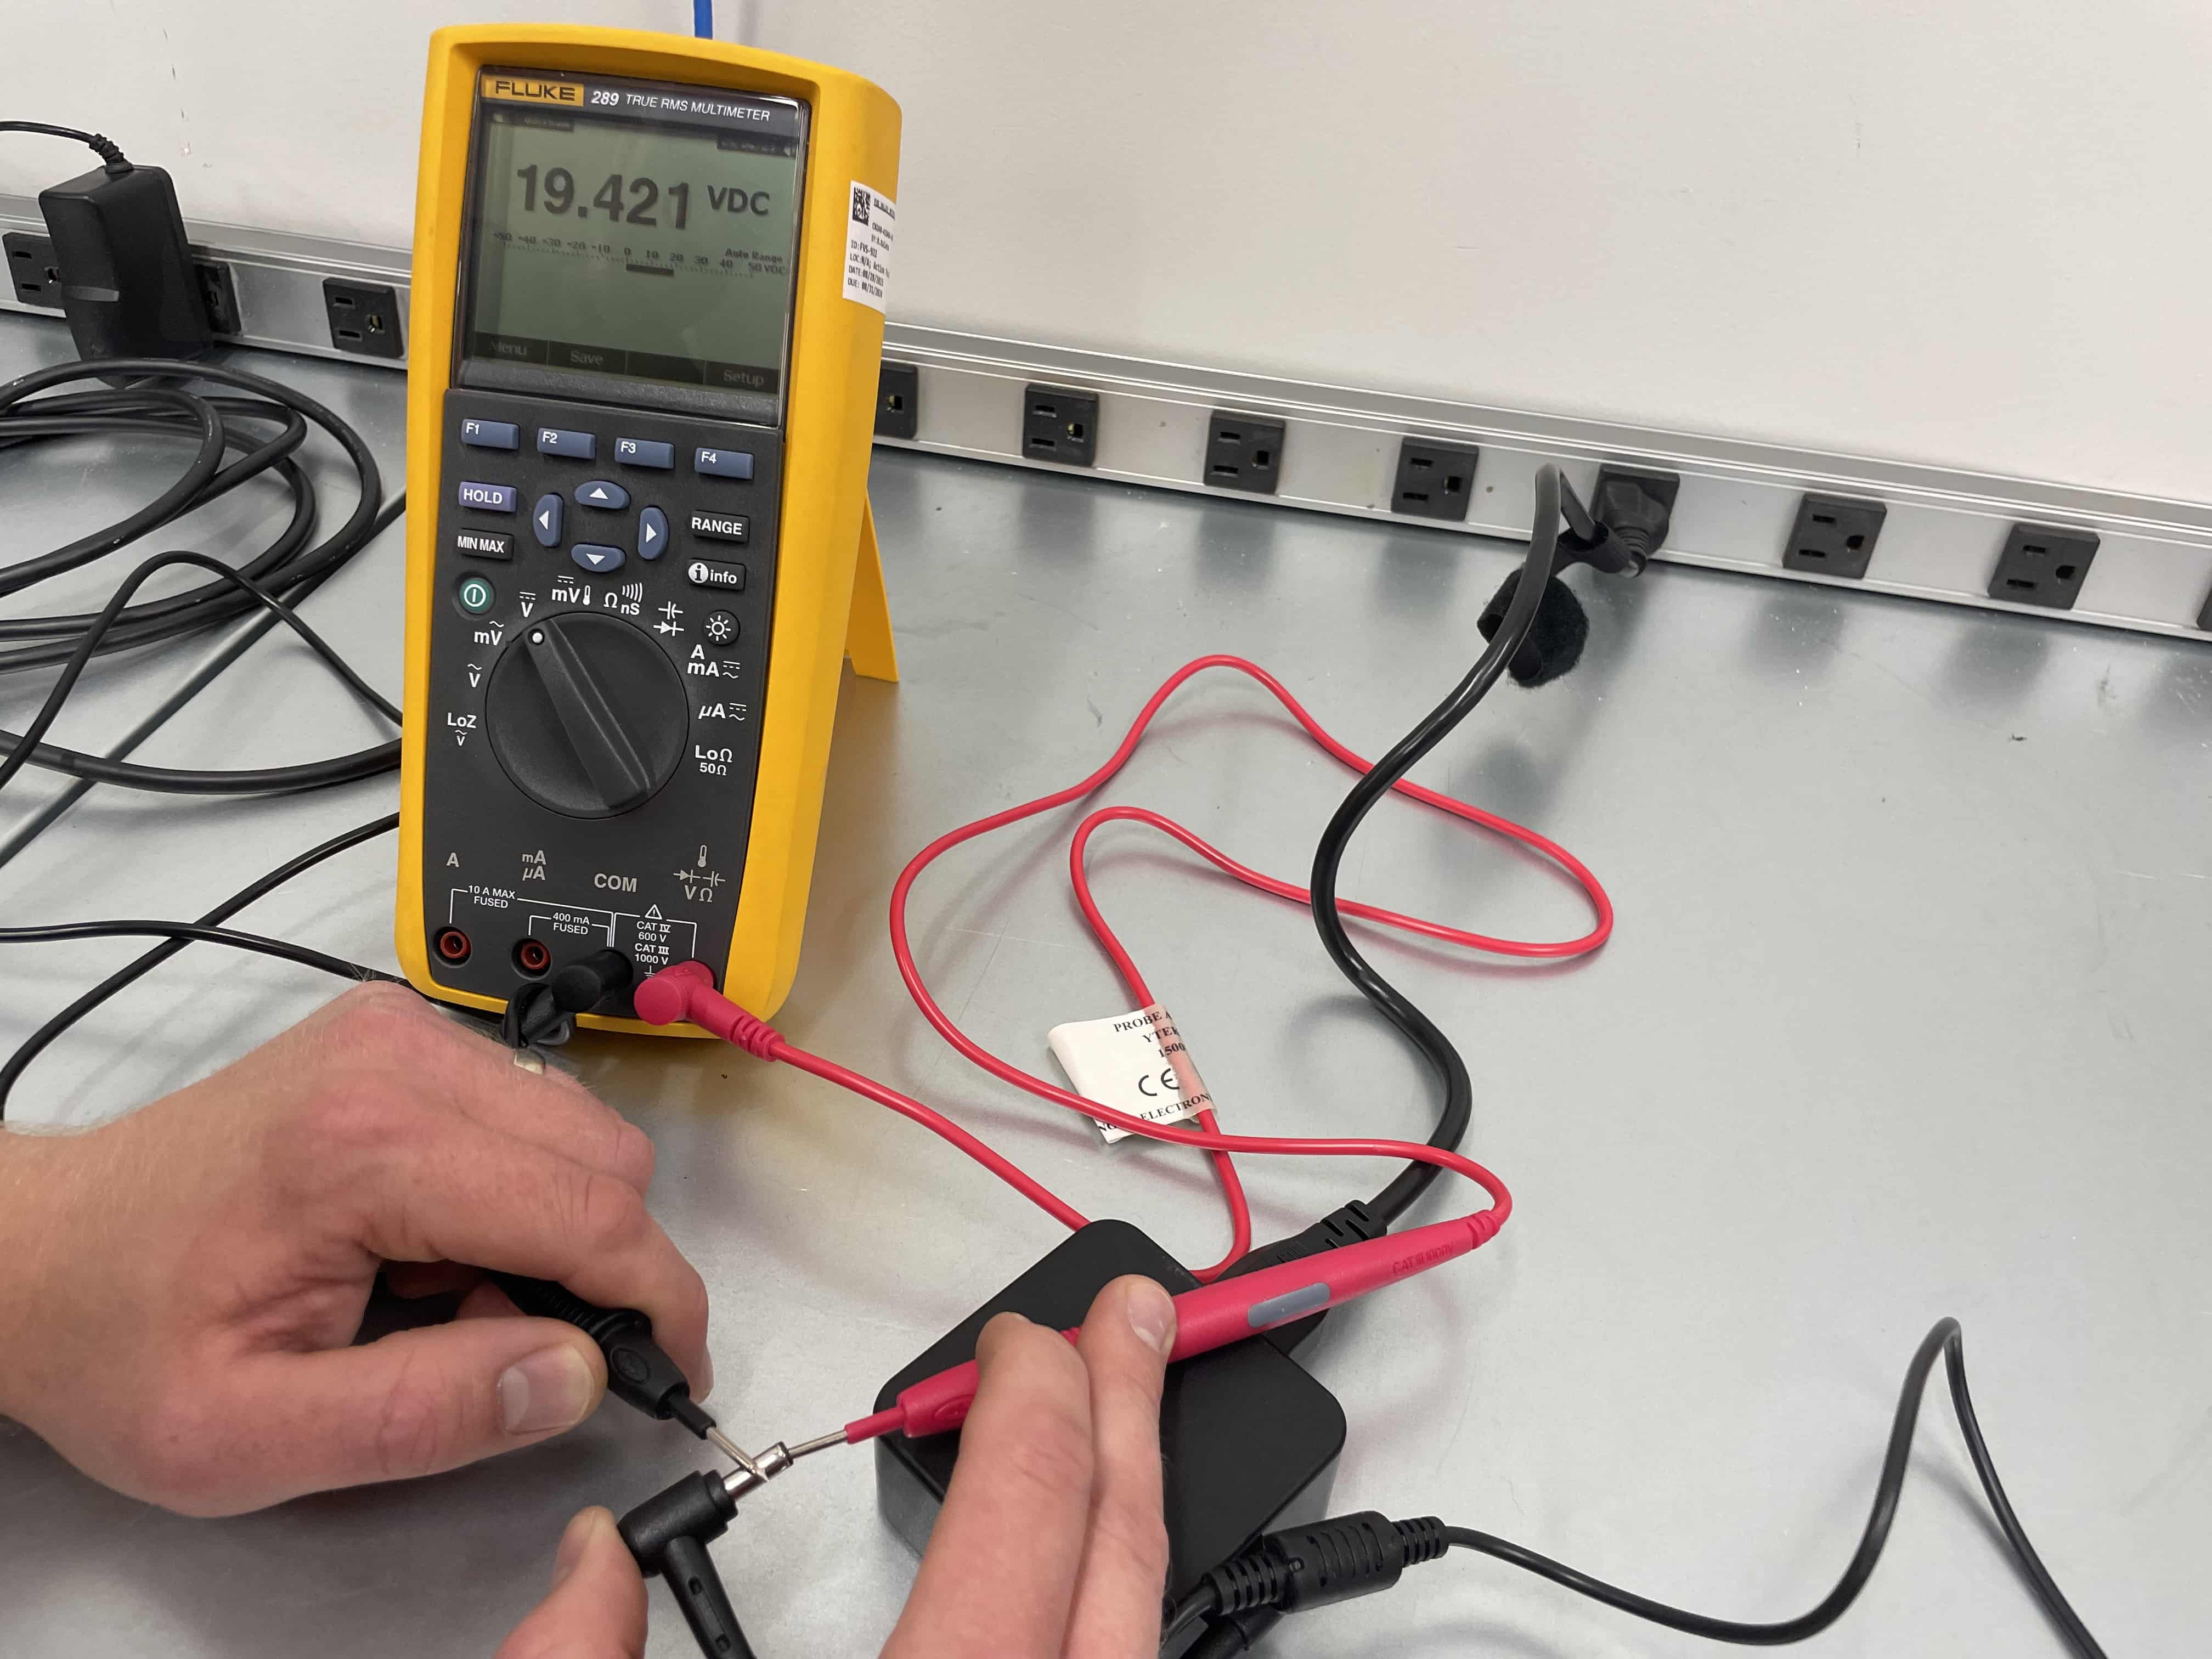 How to Use a Multimeter - Checking a Power Supply